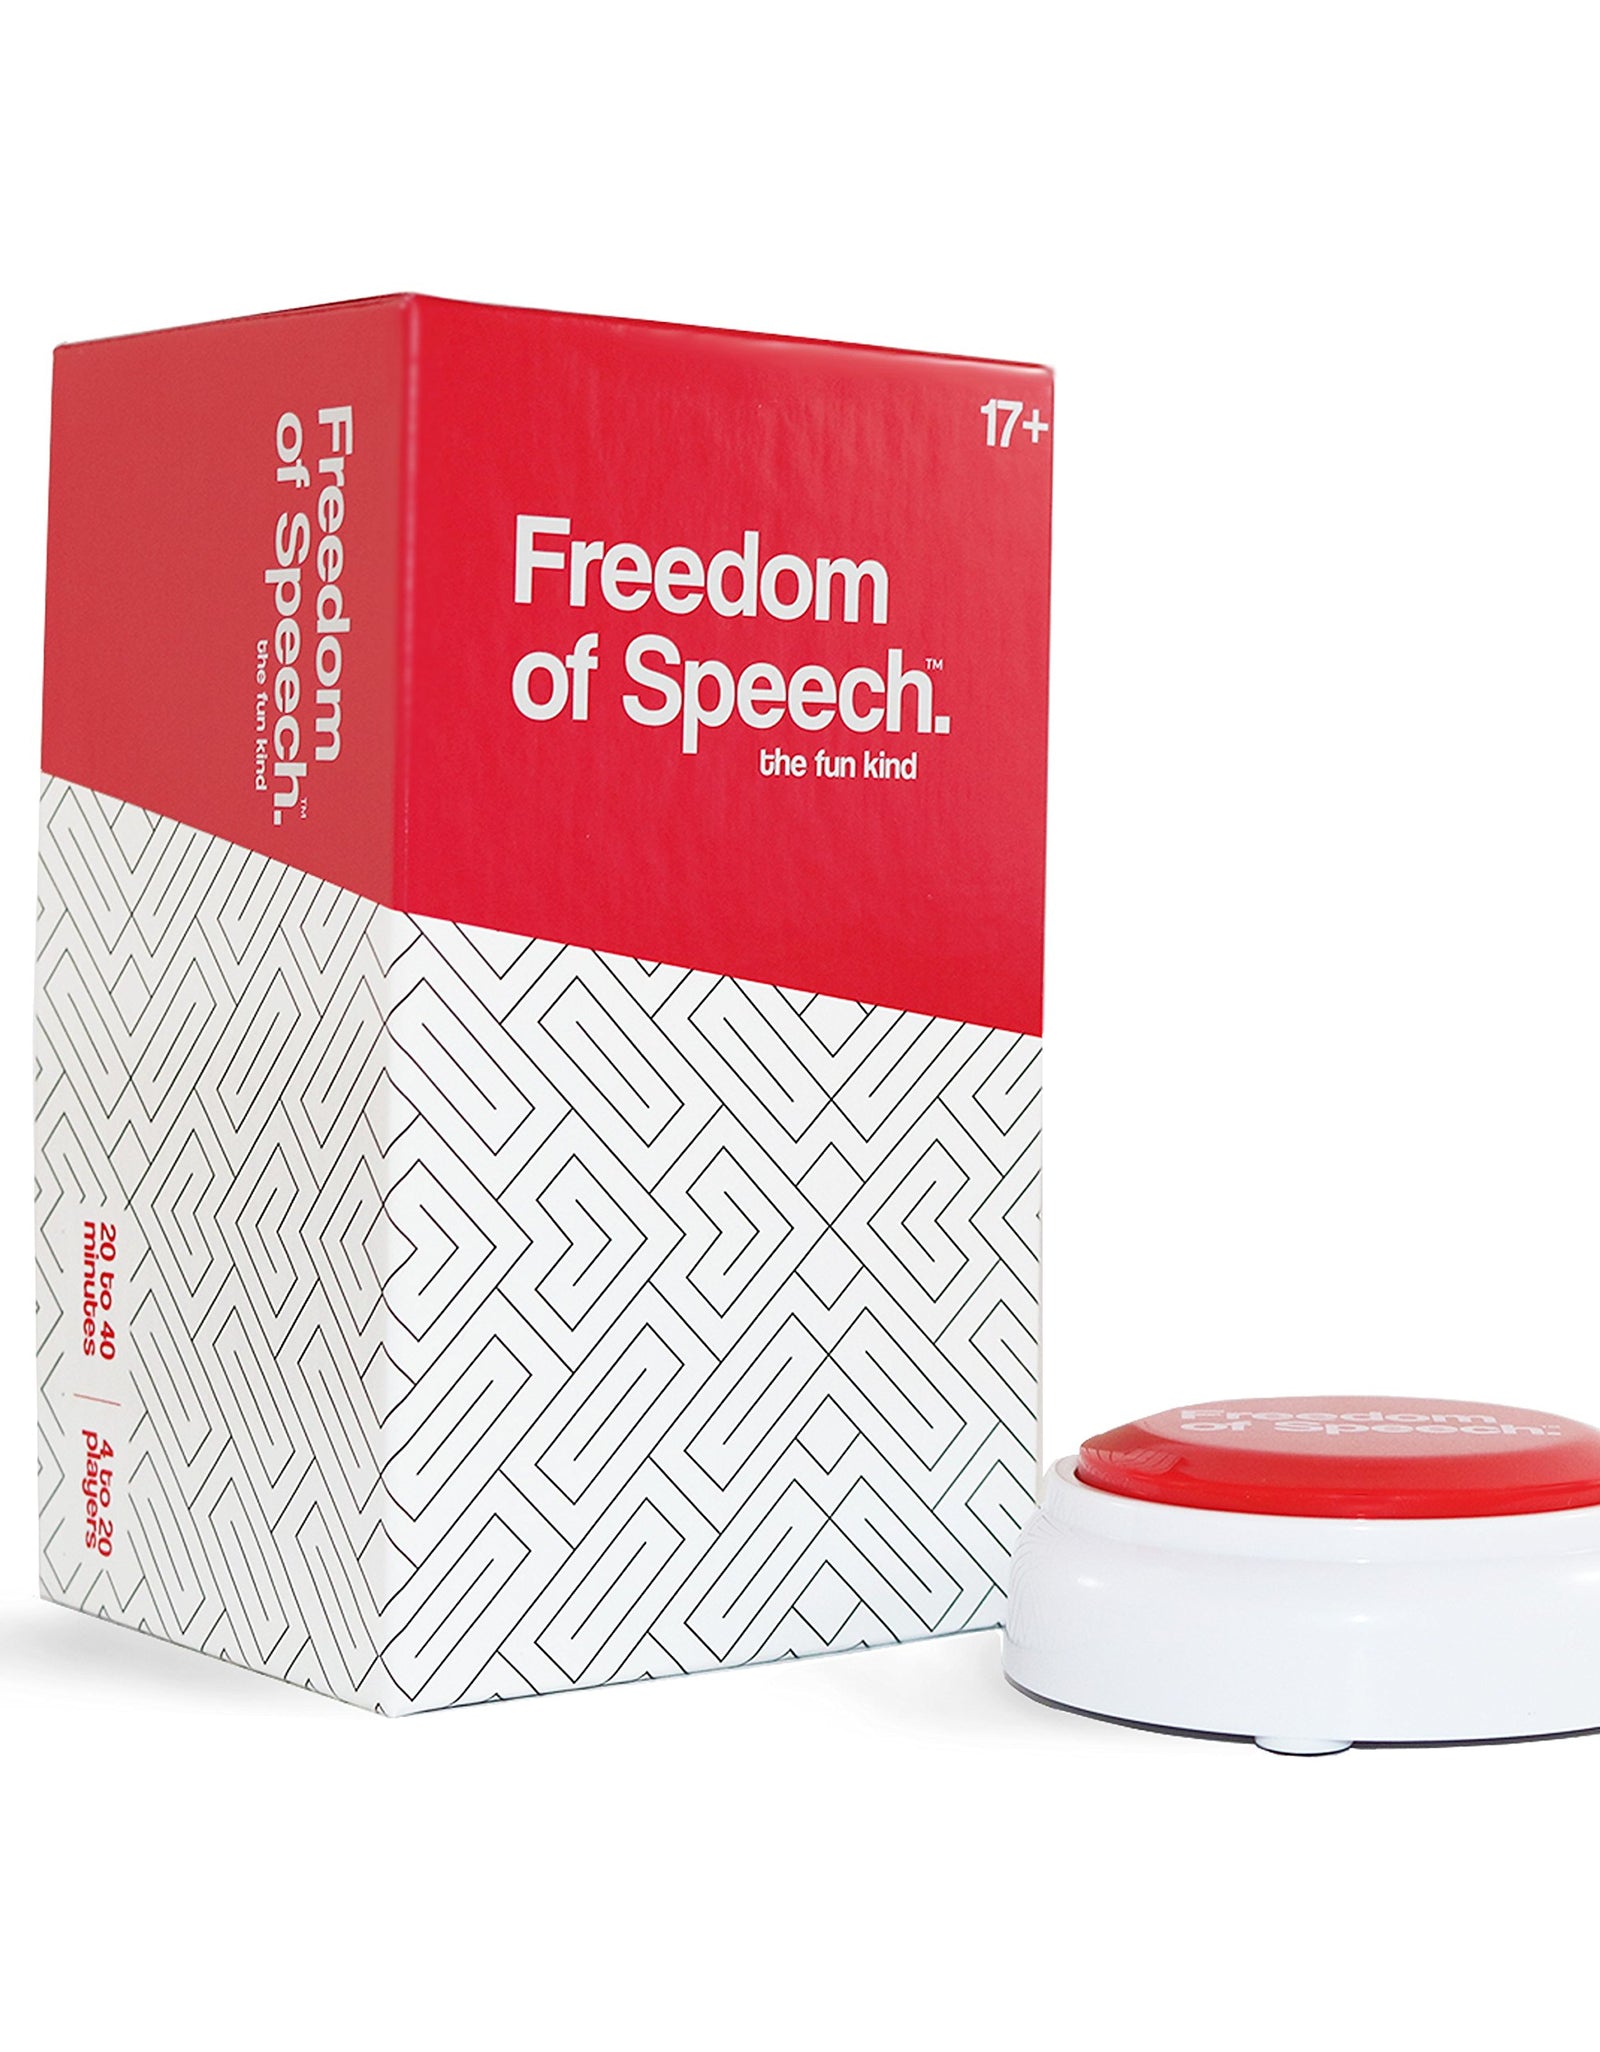 Freedom of Speech, the fun kind - A Party Card Game